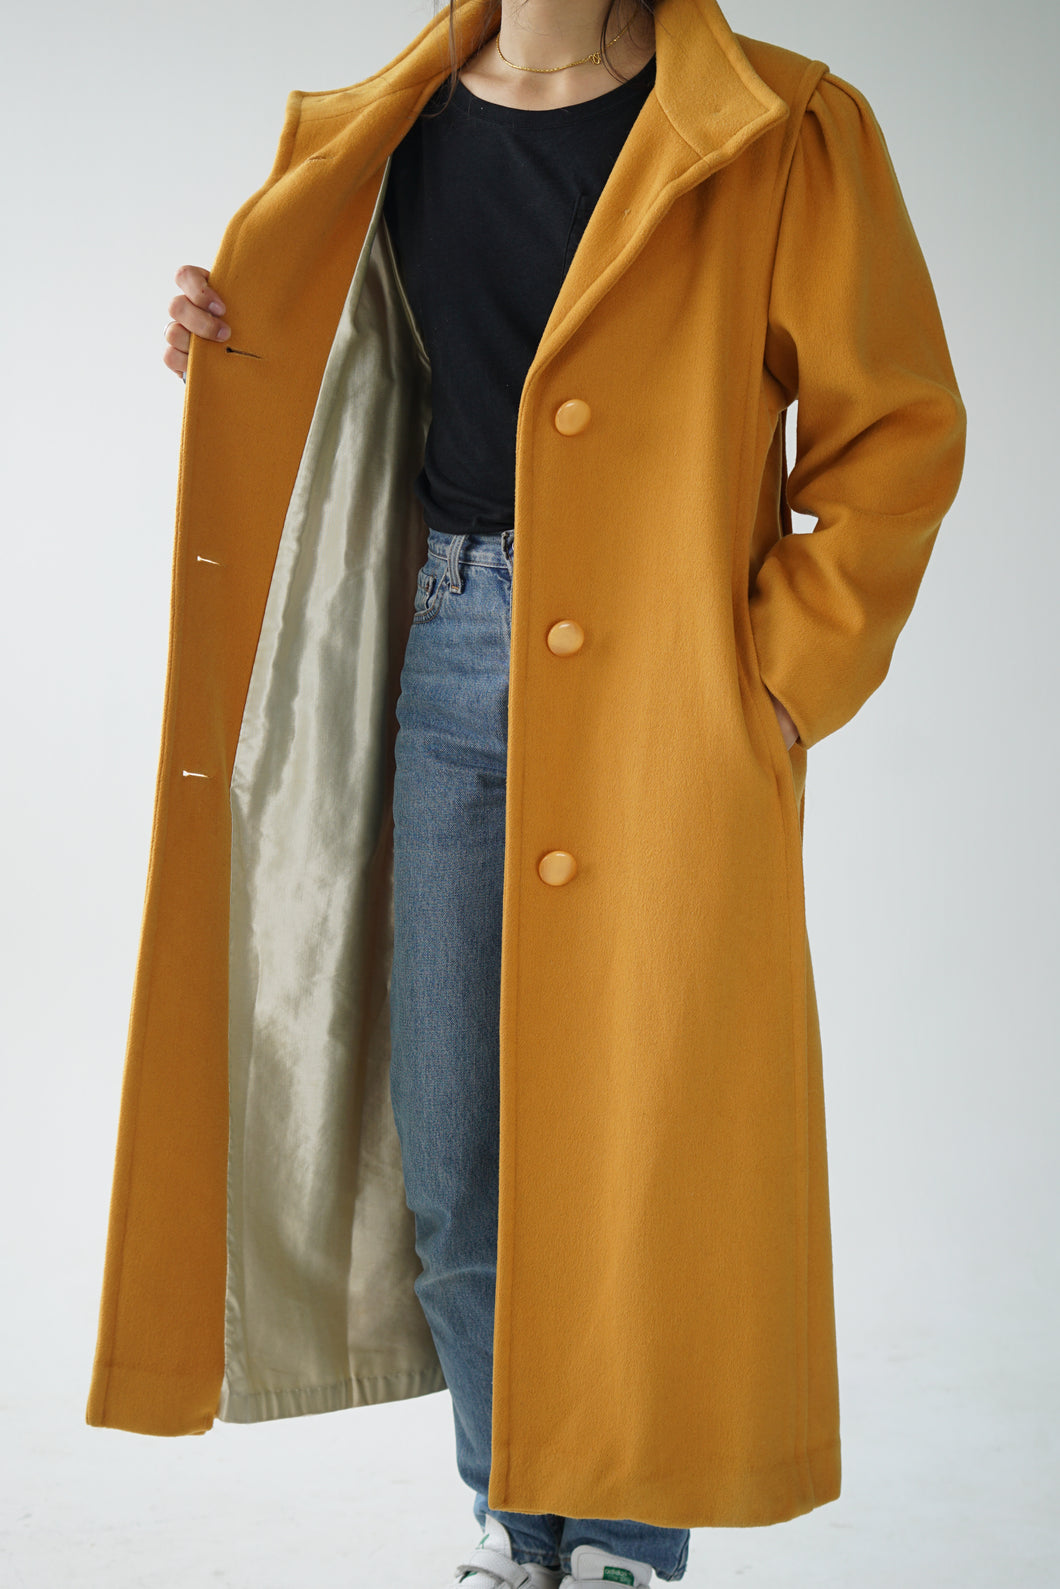 Vintage long wool coat in yellow made in Canada